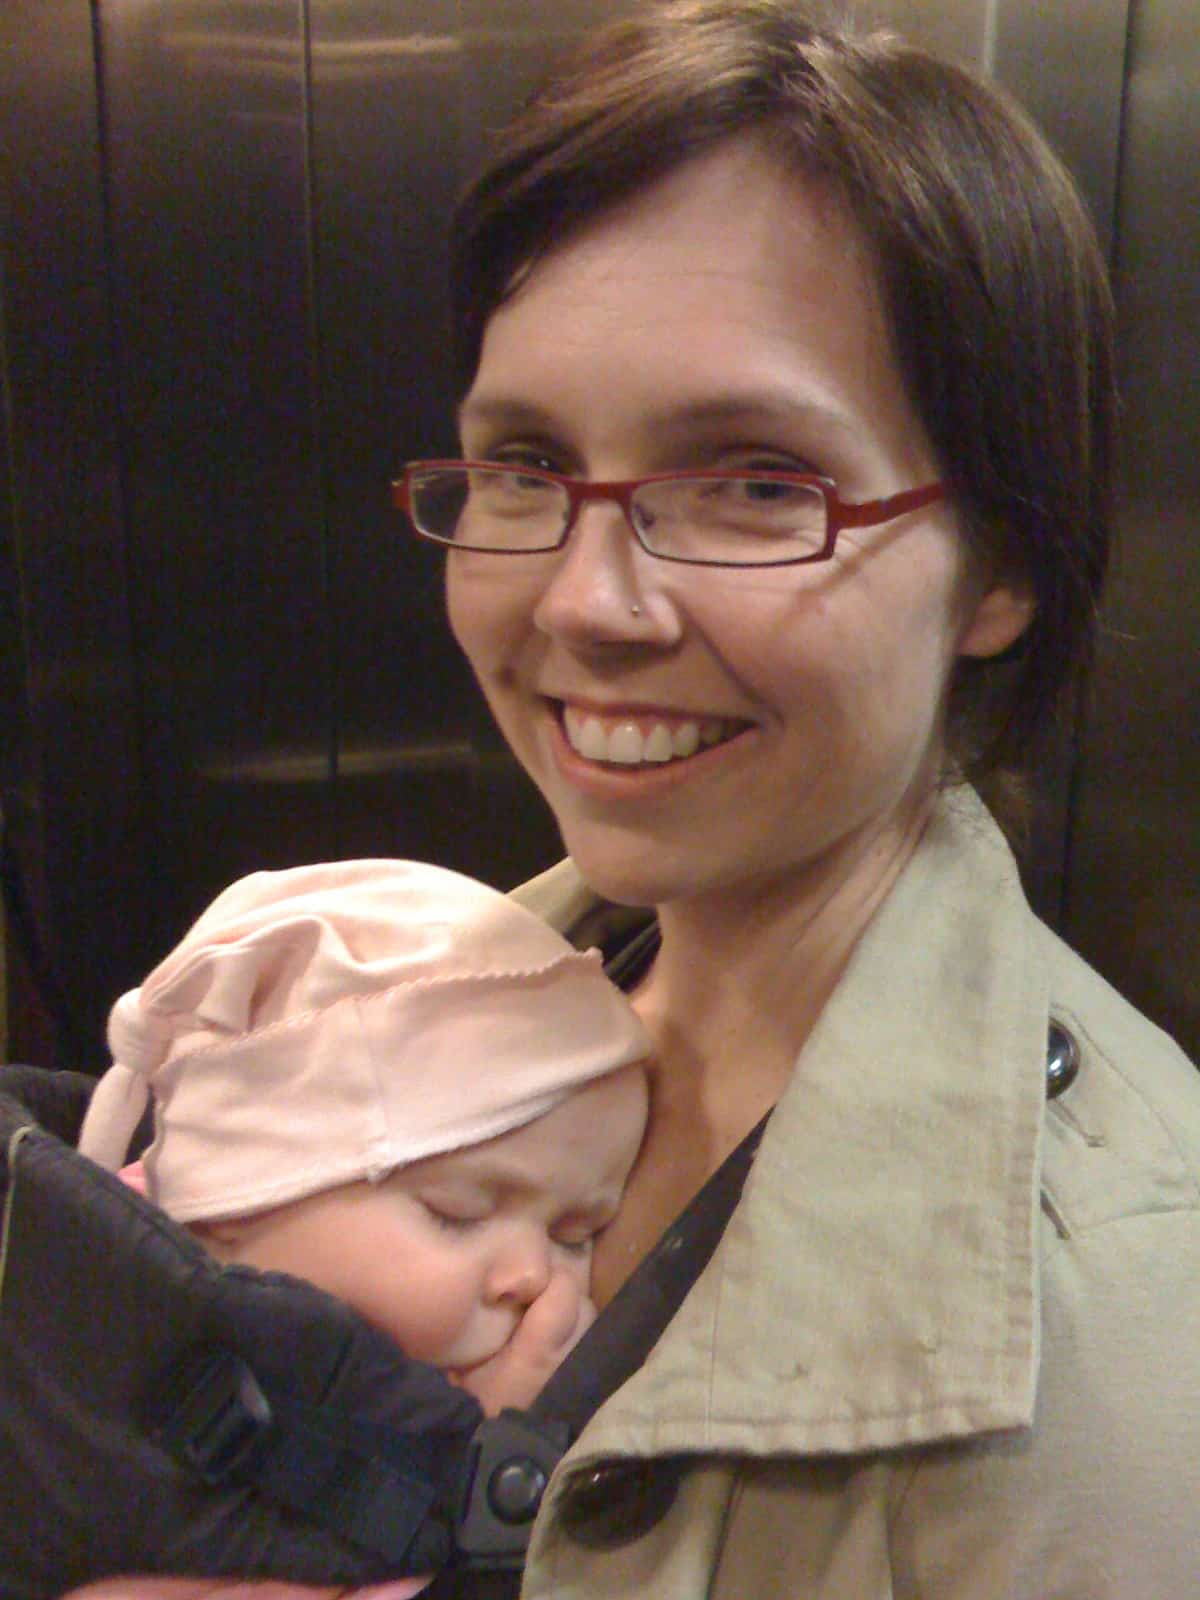 Me (blissfully happy) with Ava in 2009.